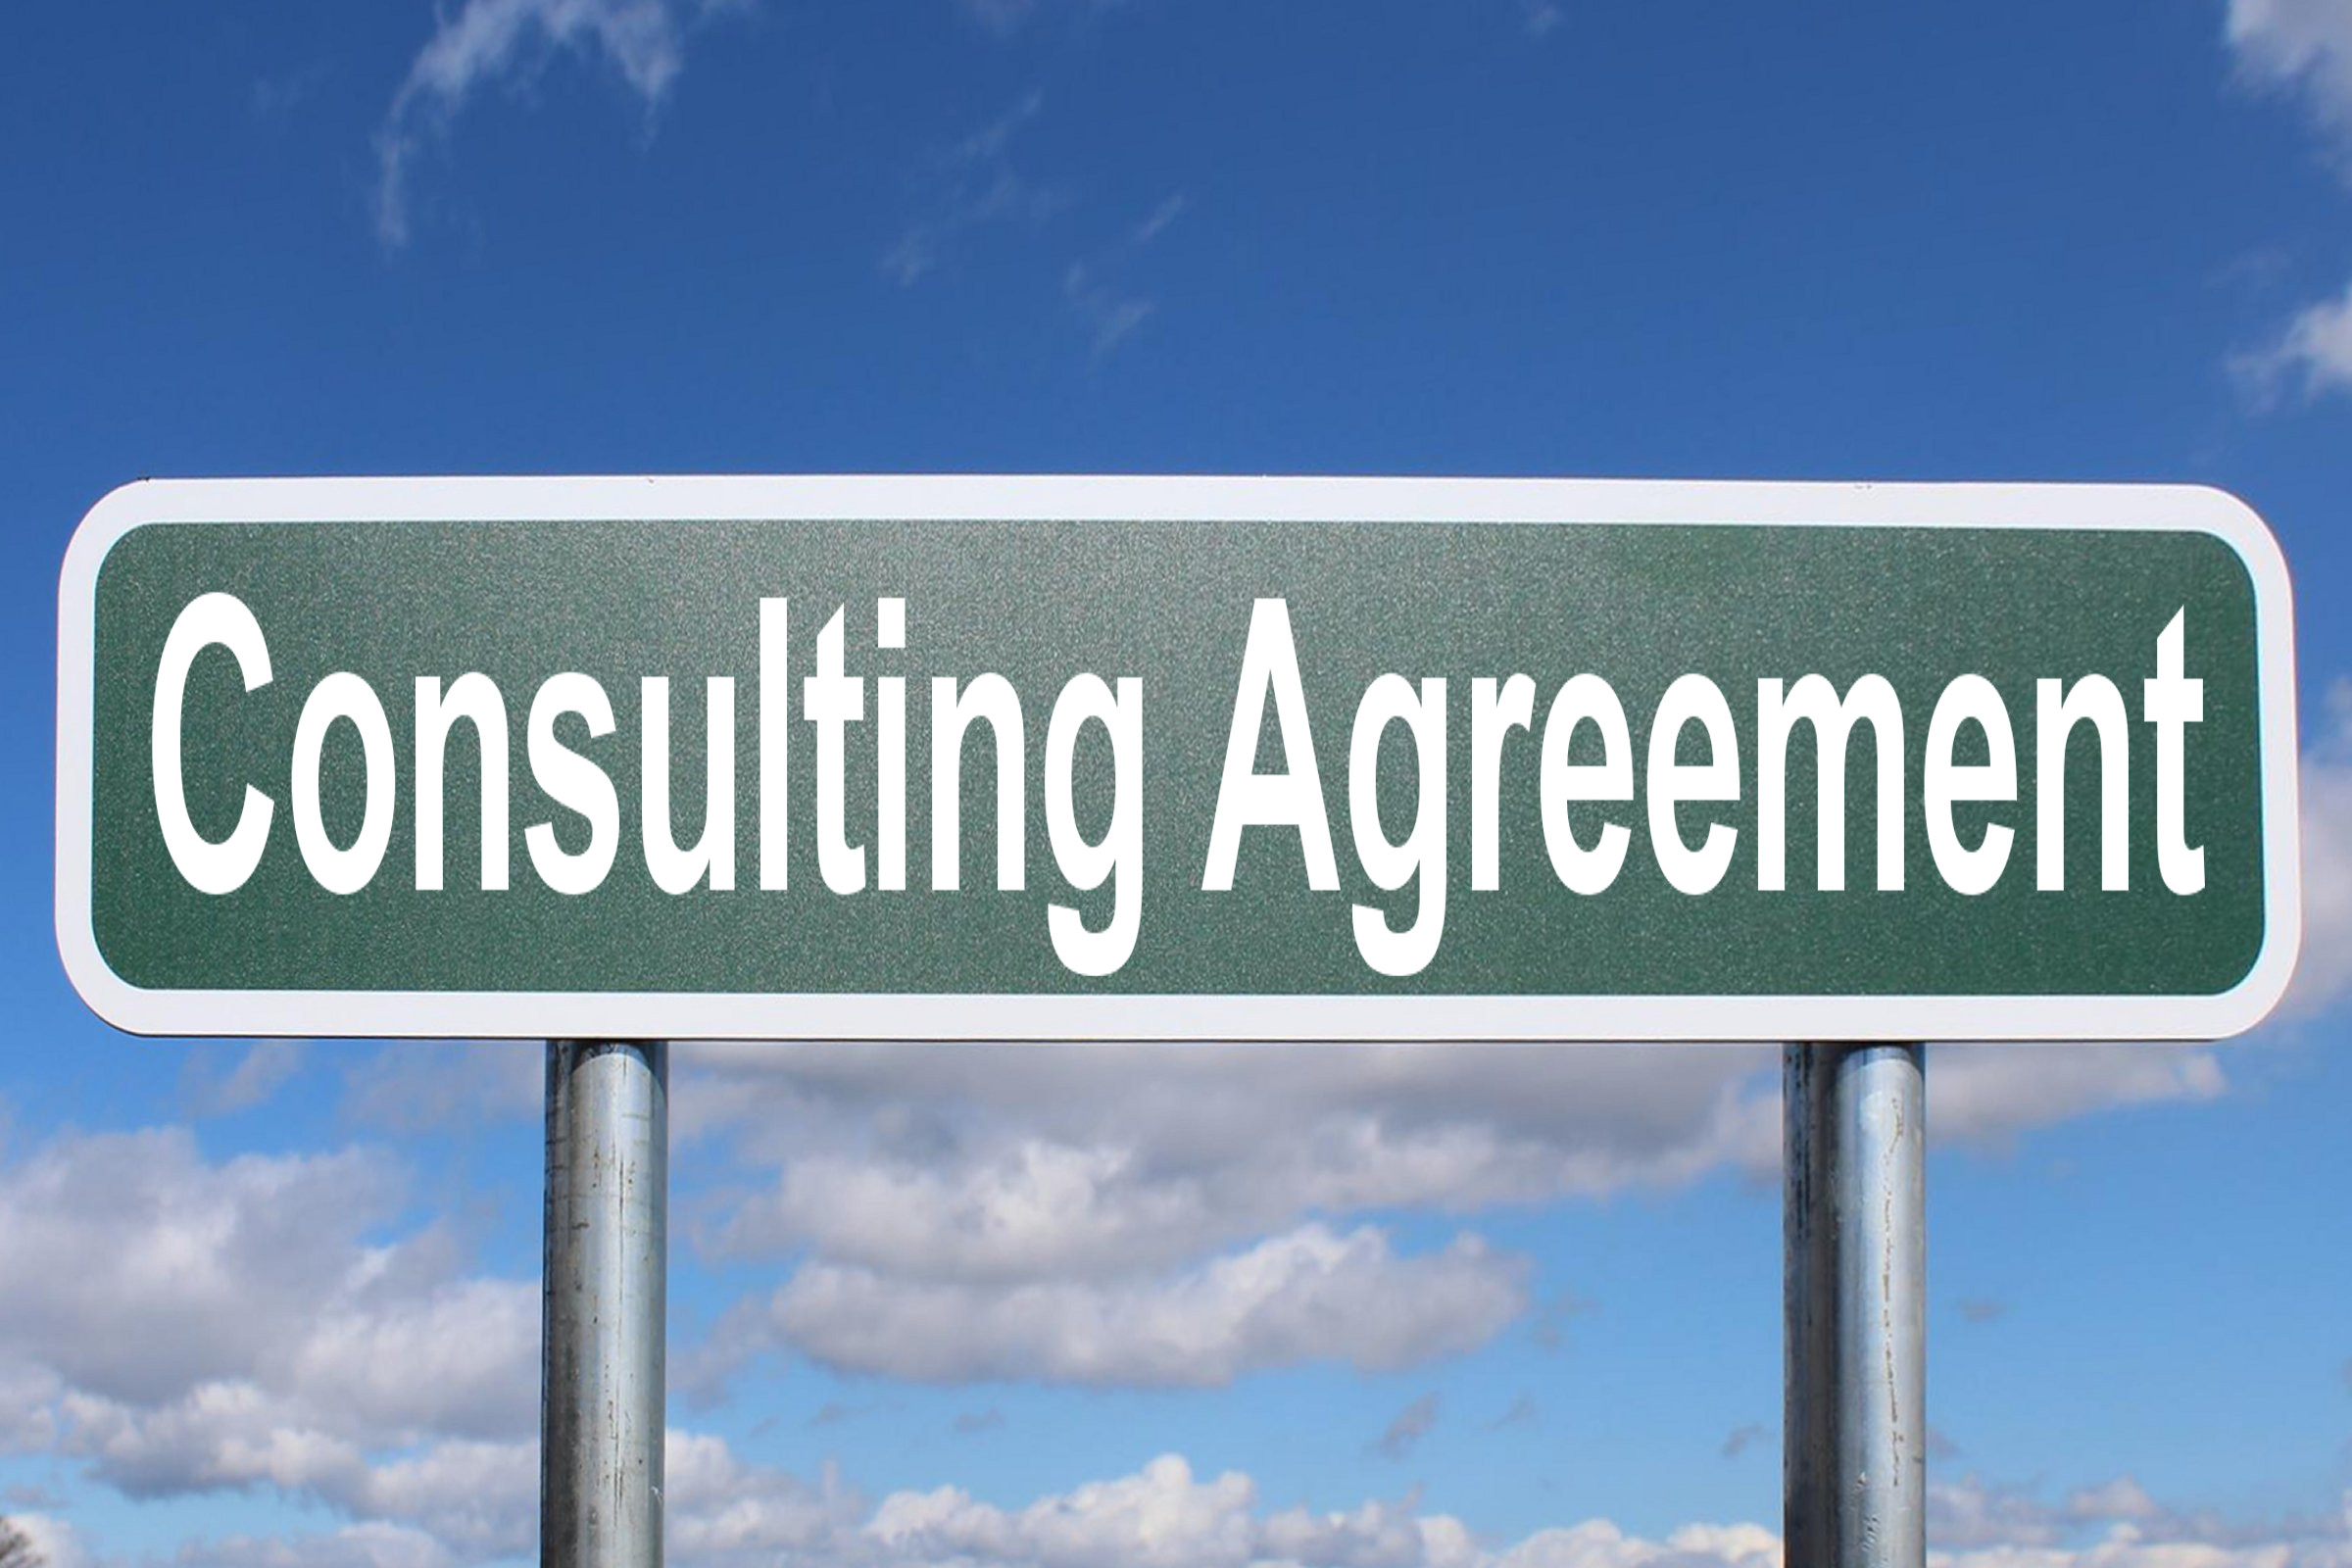 consulting agreement